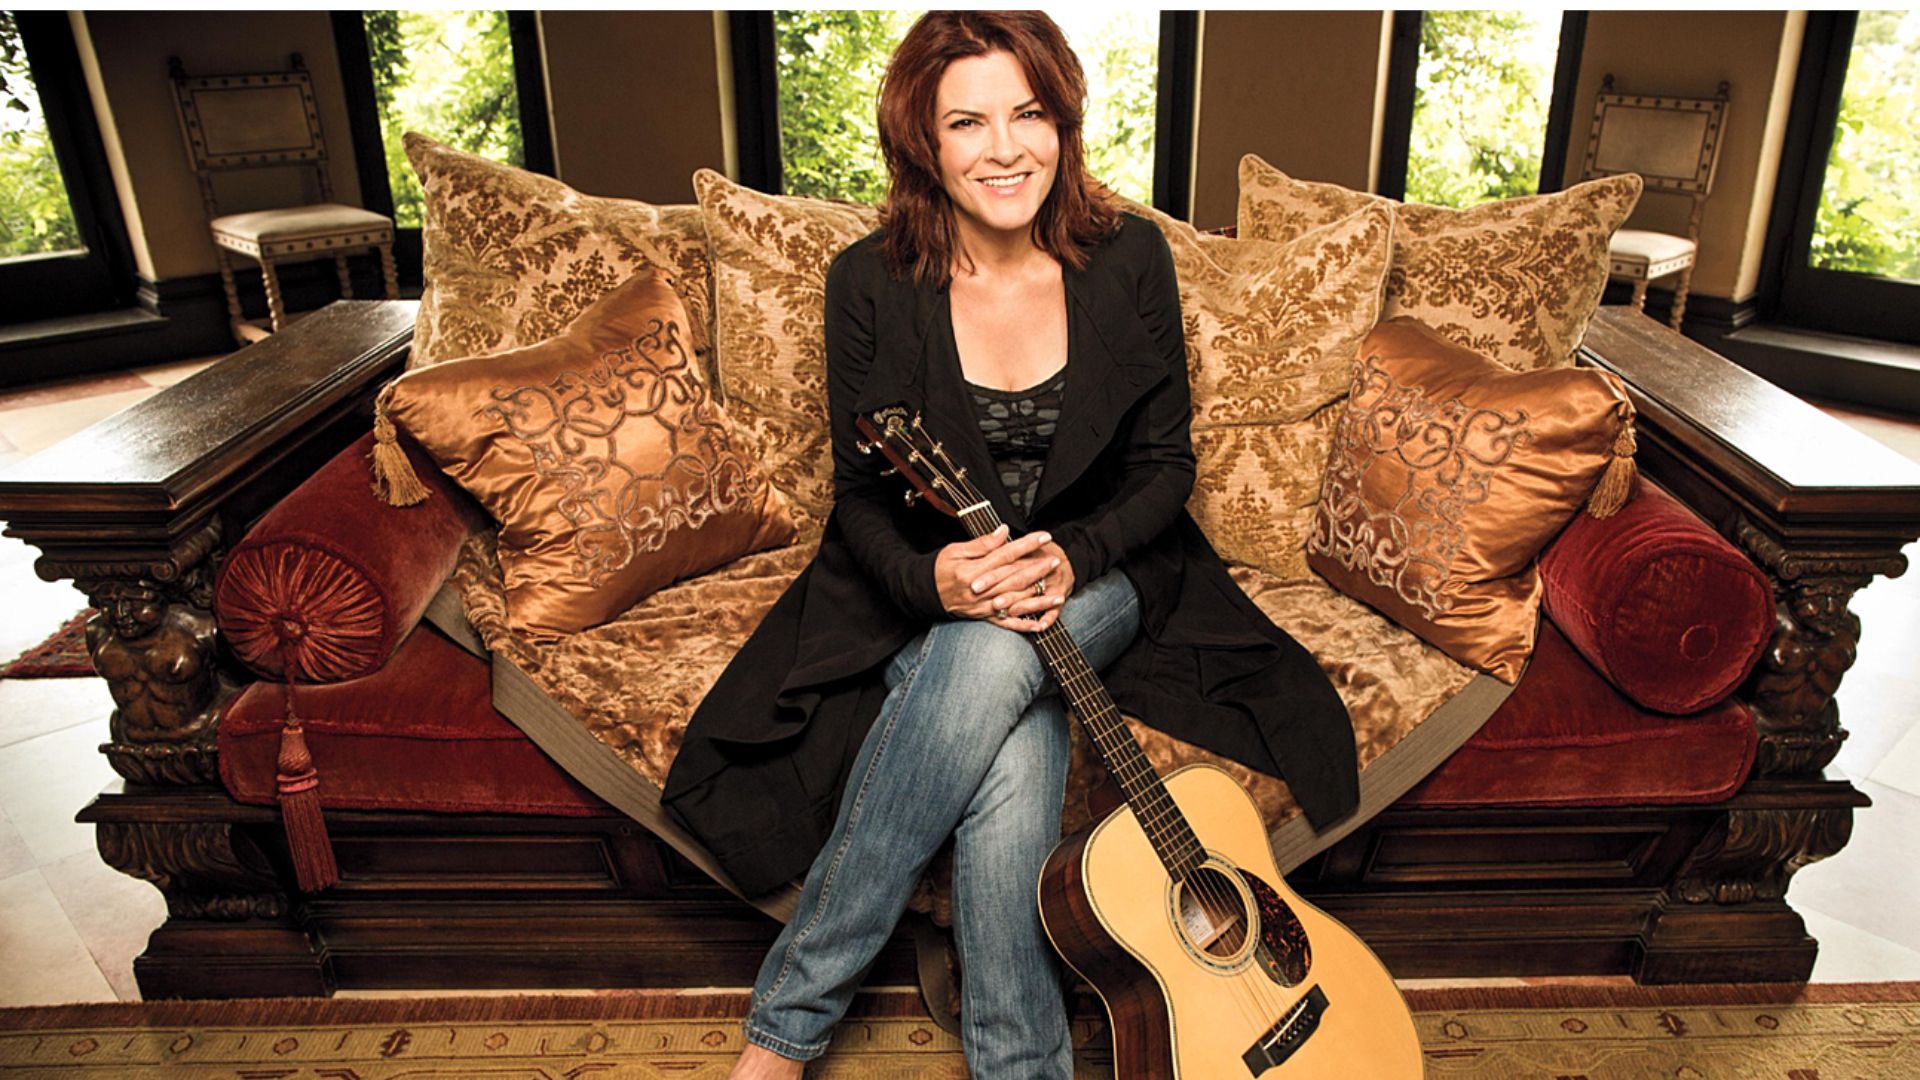 Rosanne Cash Sitting On Sofa With A Guitar In Hand